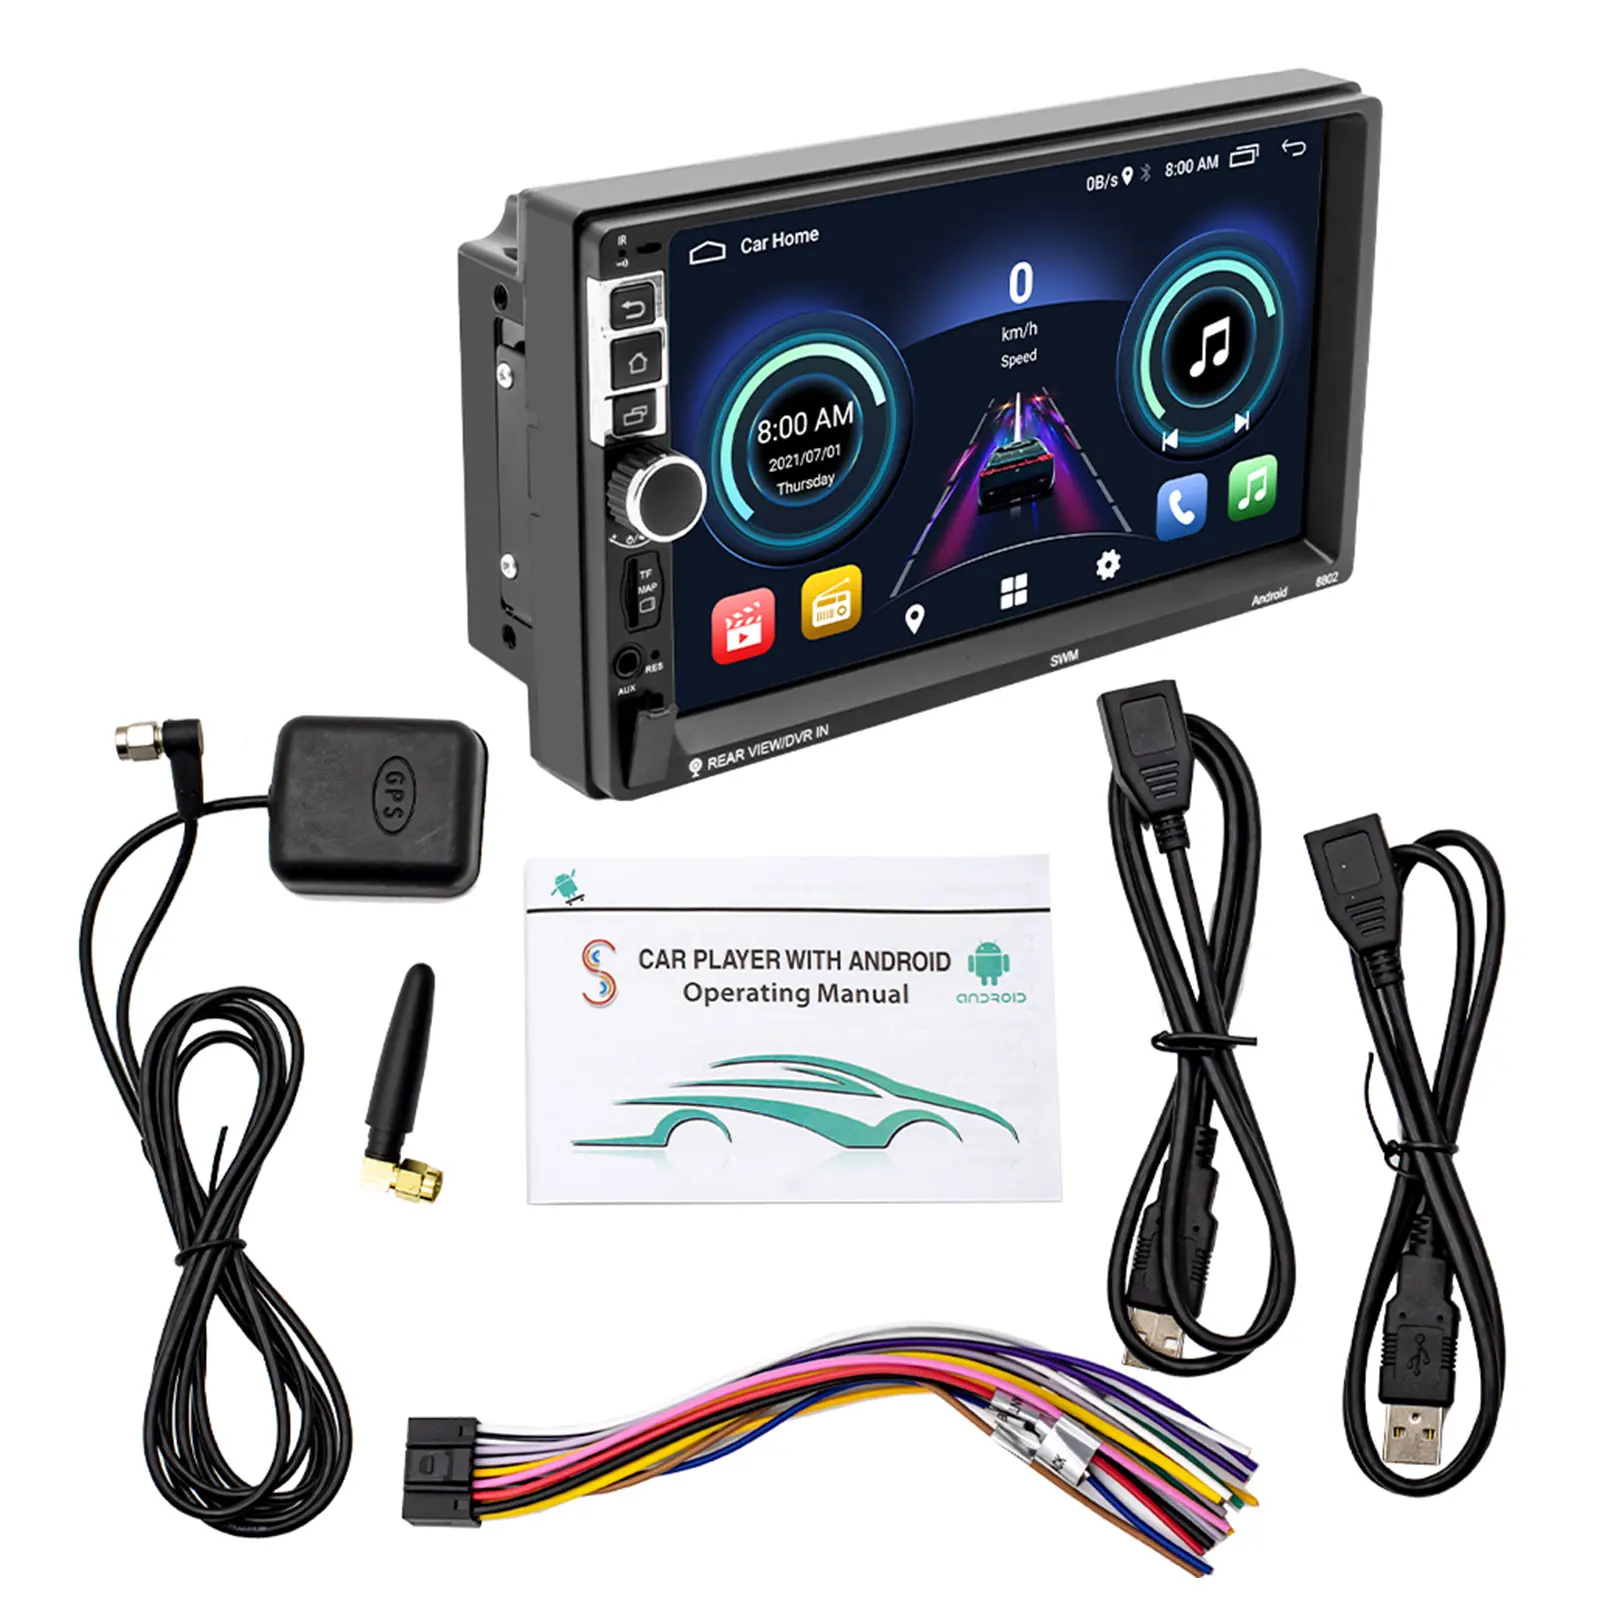 

Car Stereo Double Din Universal All Compatible 7 Inch Touch Screen Car Stereo FM Radio Bluetoothes Mirror Link Backup Camera